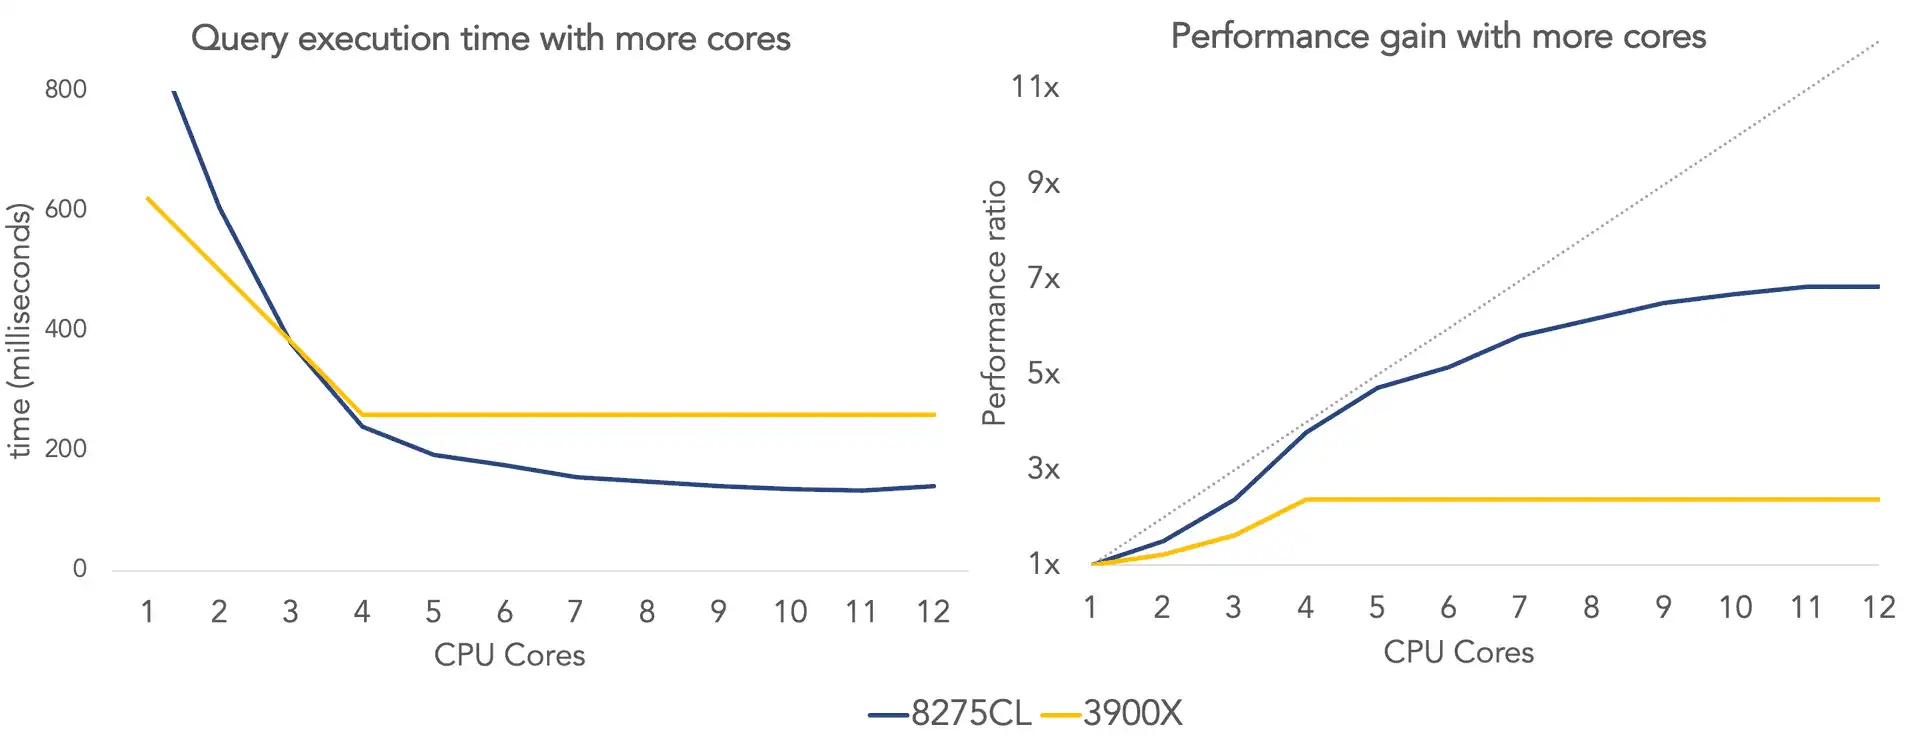 Charts showing the execution time for the Intel 8275CL and AMD 3900X when using a various number of cores